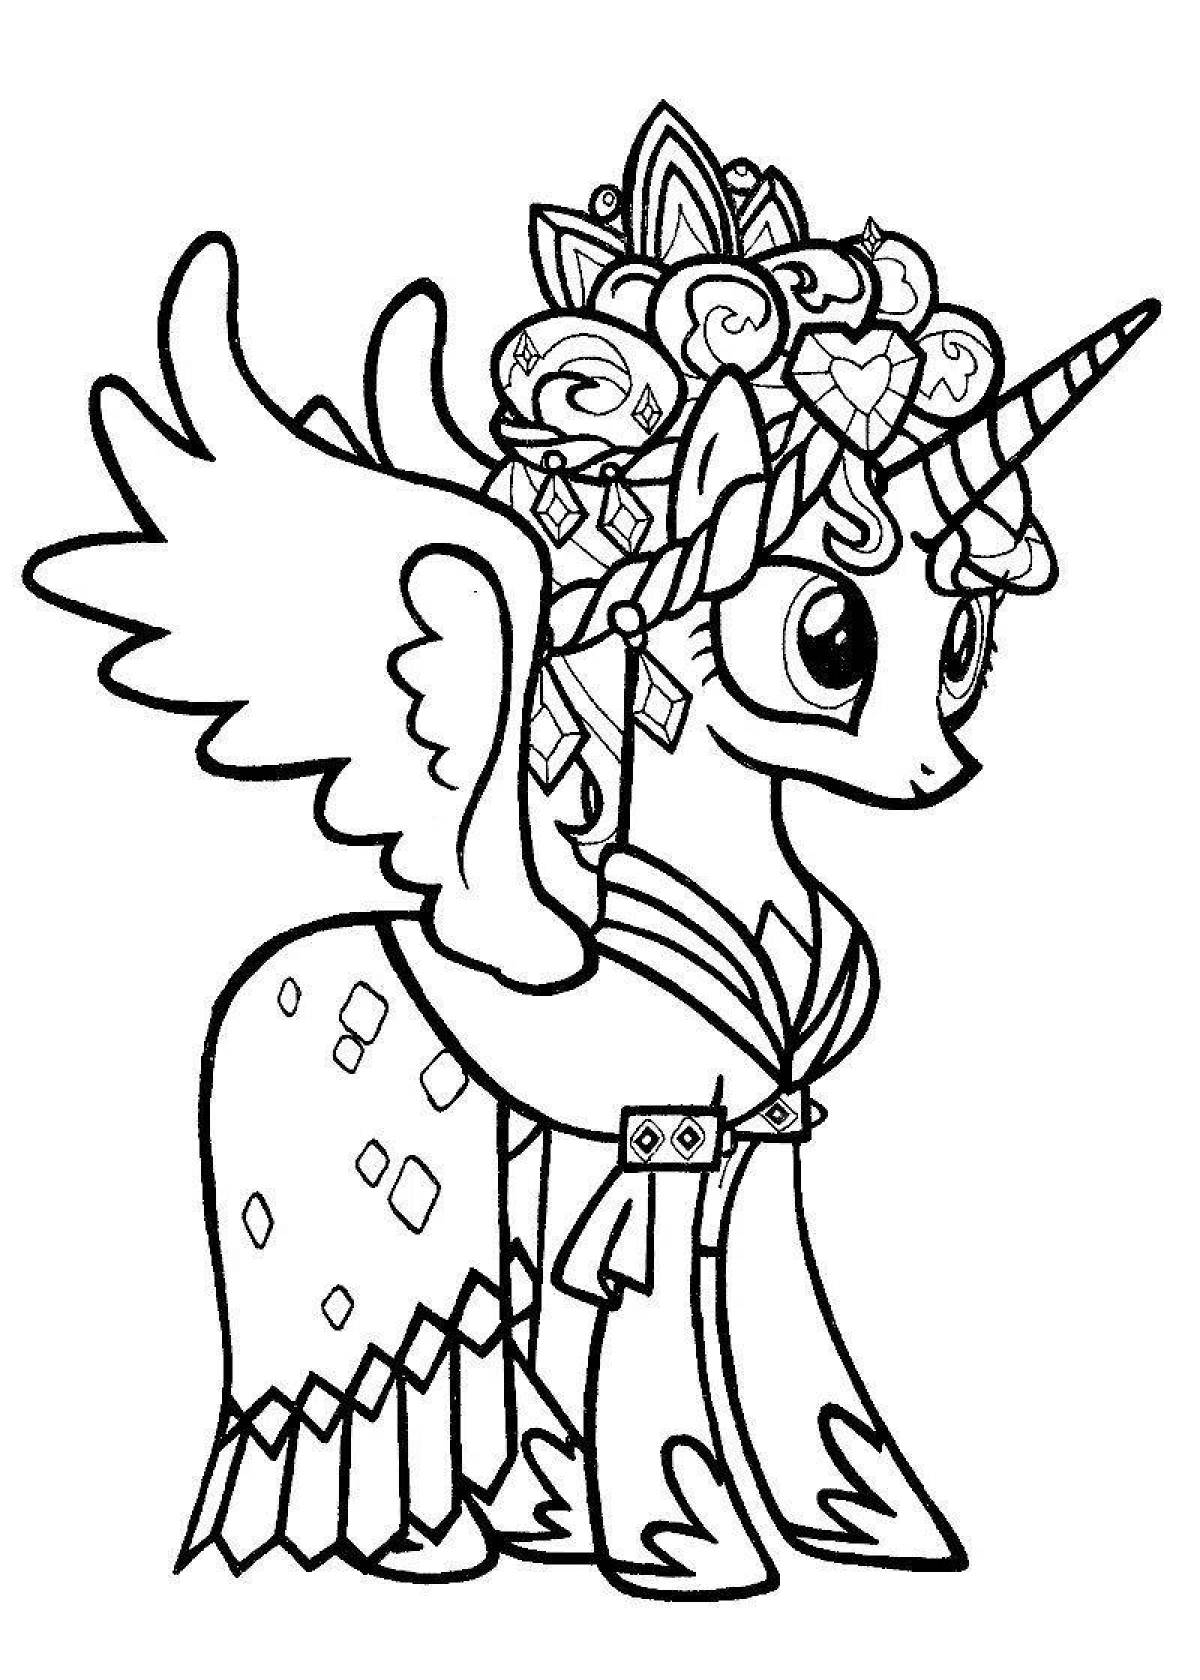 Delightful coloring my little pony princesses